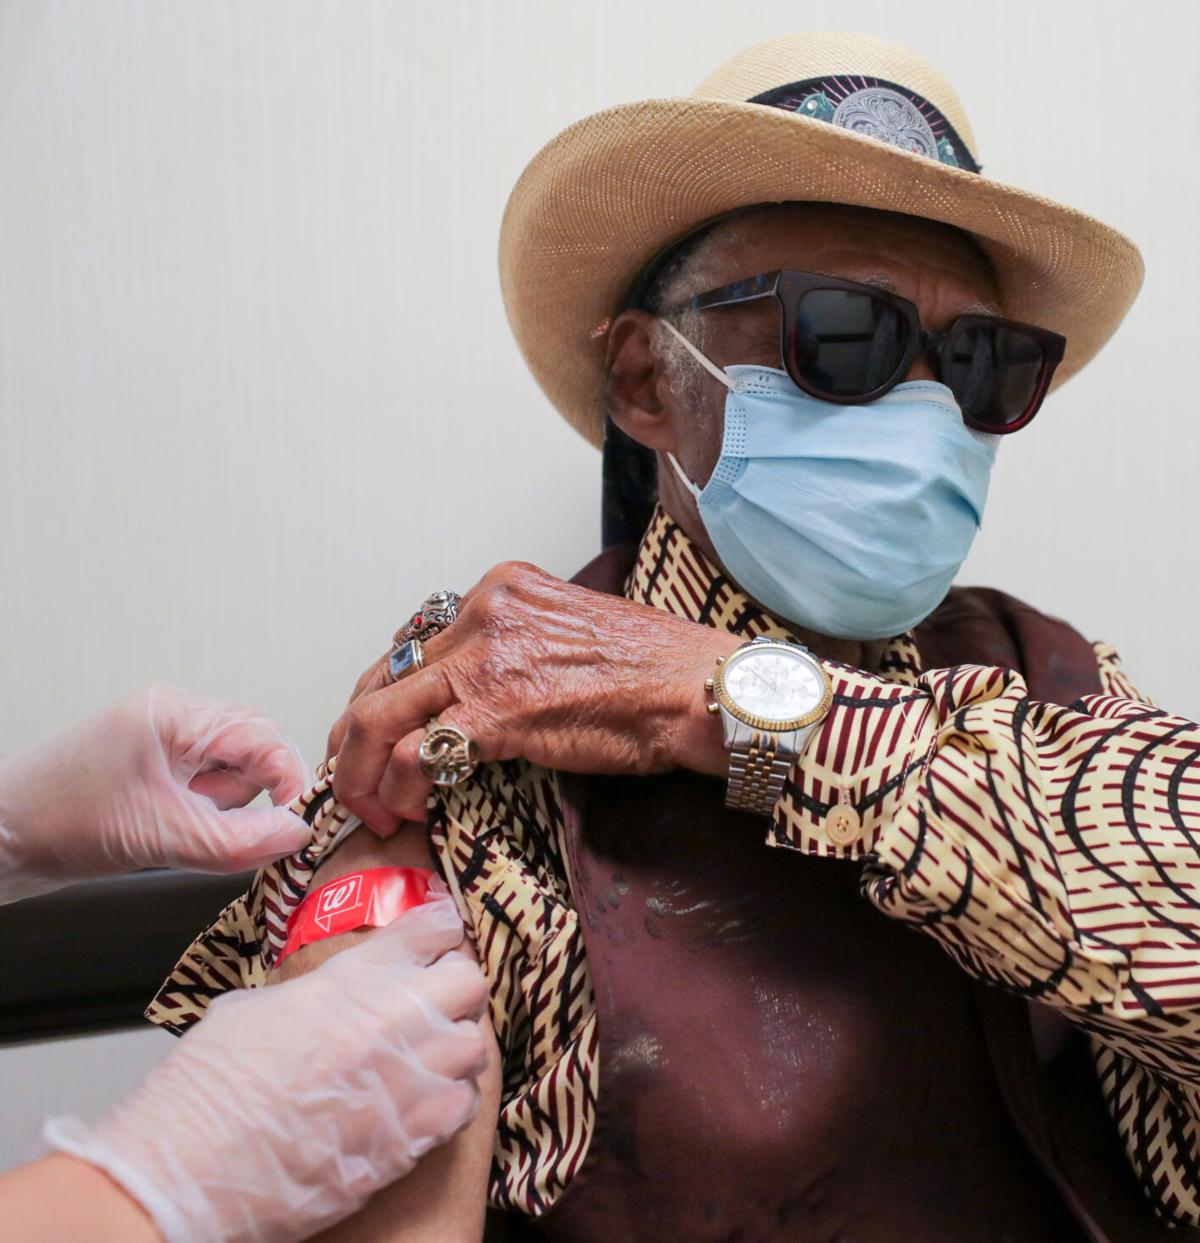 Little Freddie King gets the COVID vaccine: 'I done made up my mind to get the shot' | Music ...